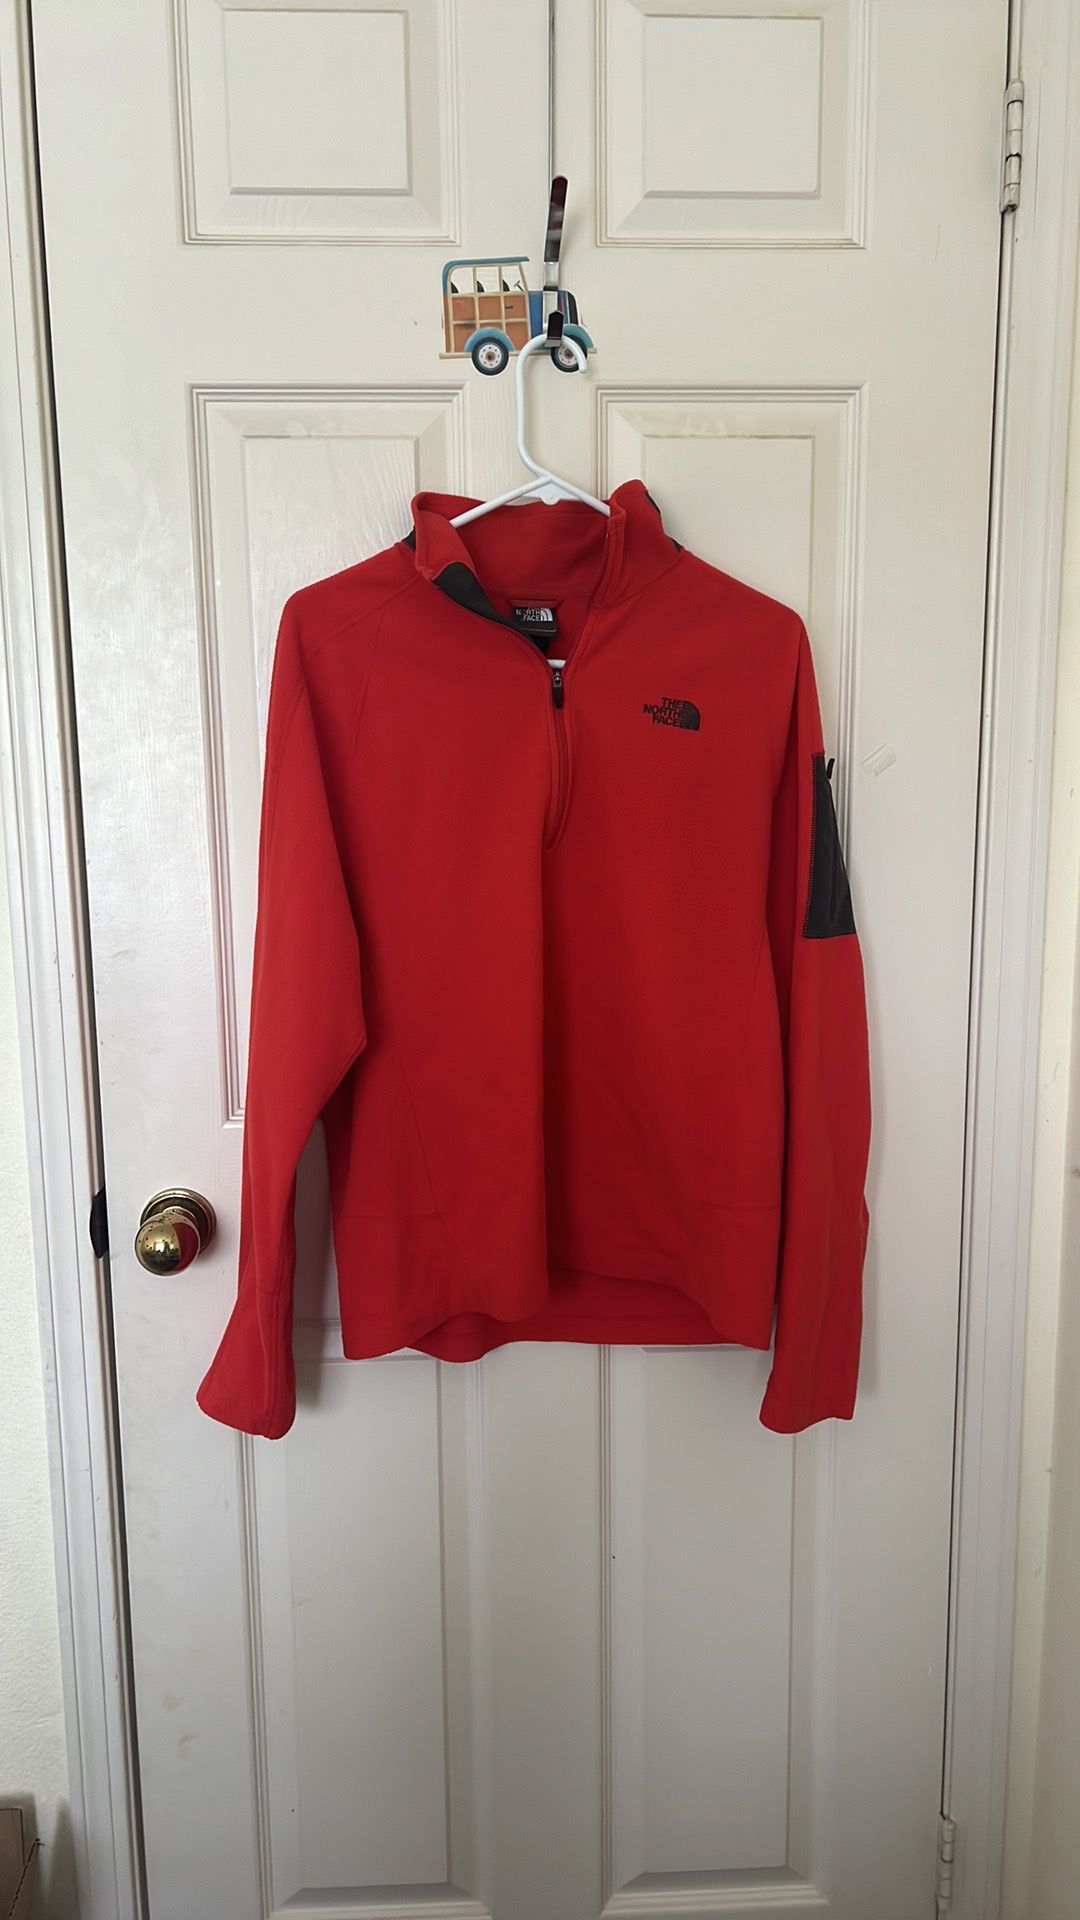 Cotton Pure Red North Face Fleece Jacket Sweater 